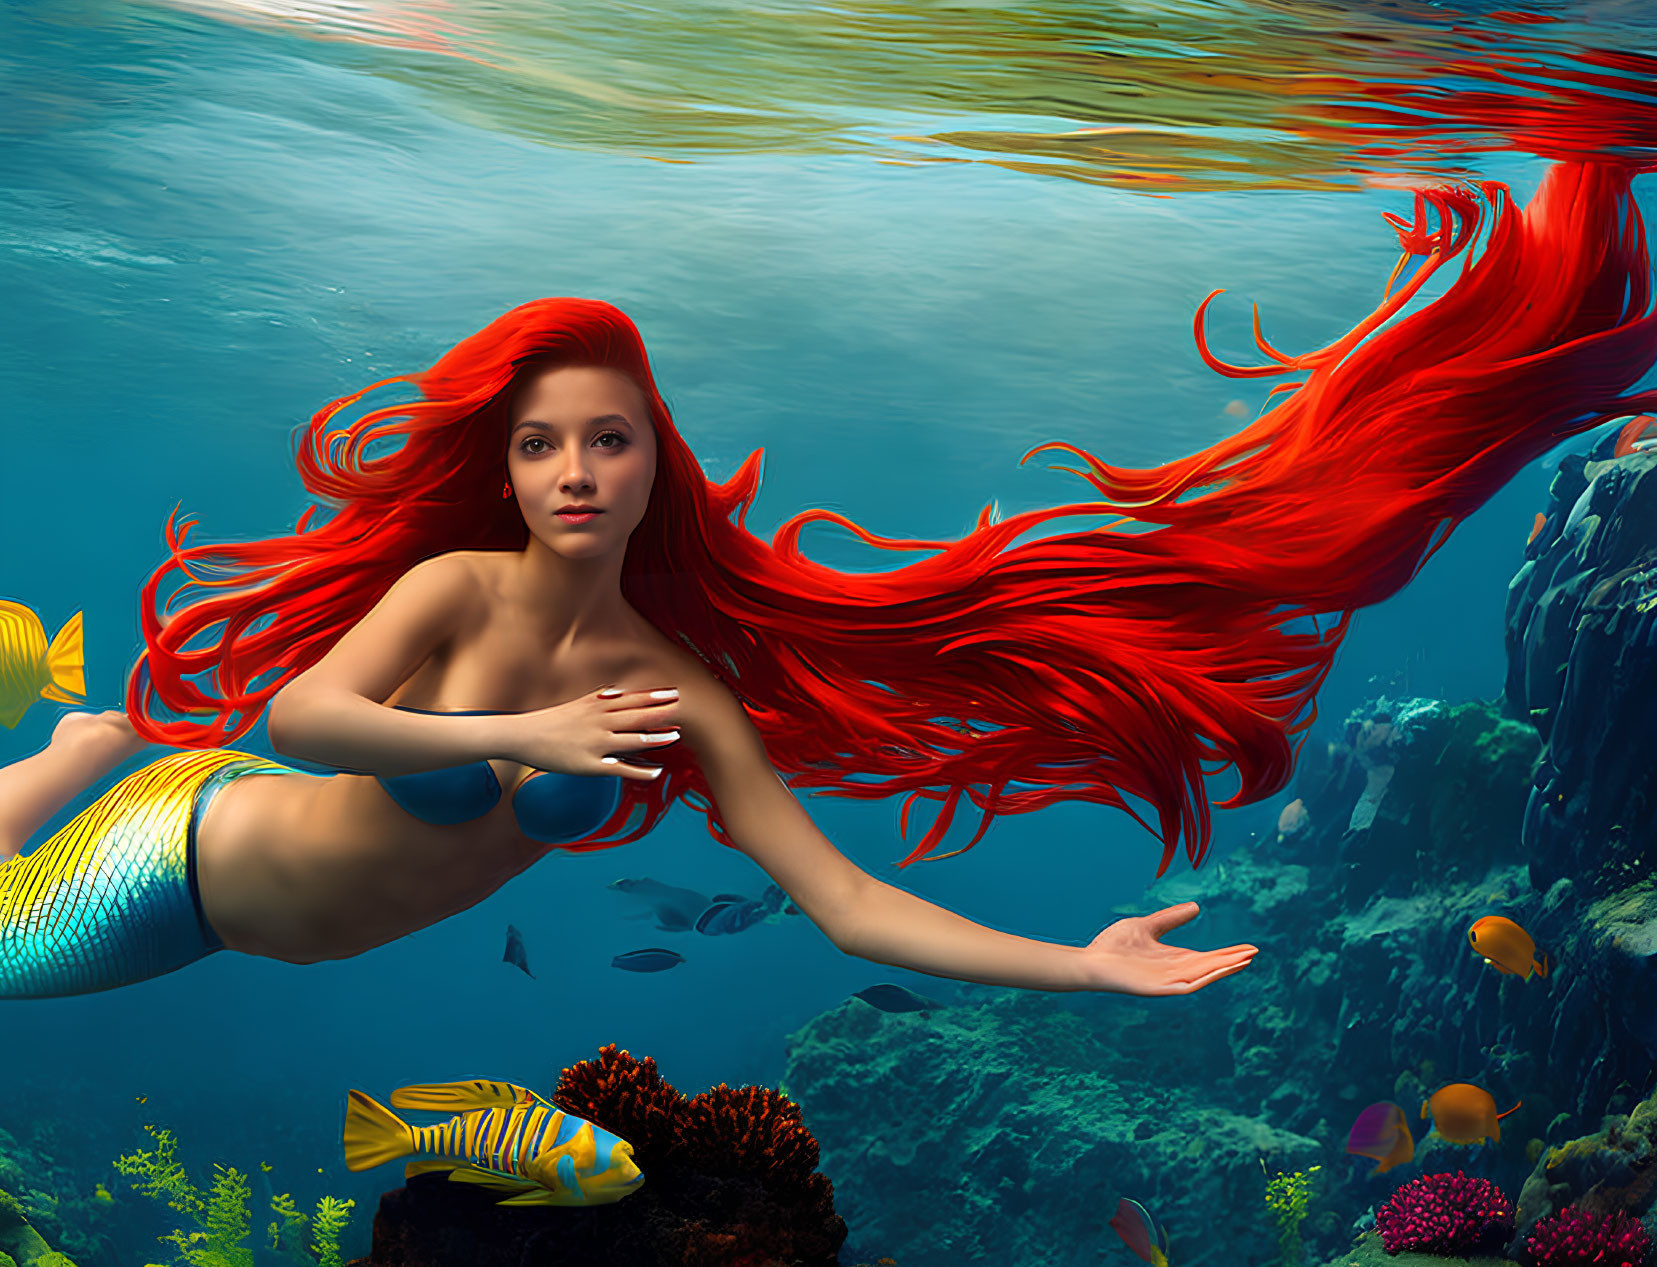 Red-haired mermaid swimming with fish in underwater scene